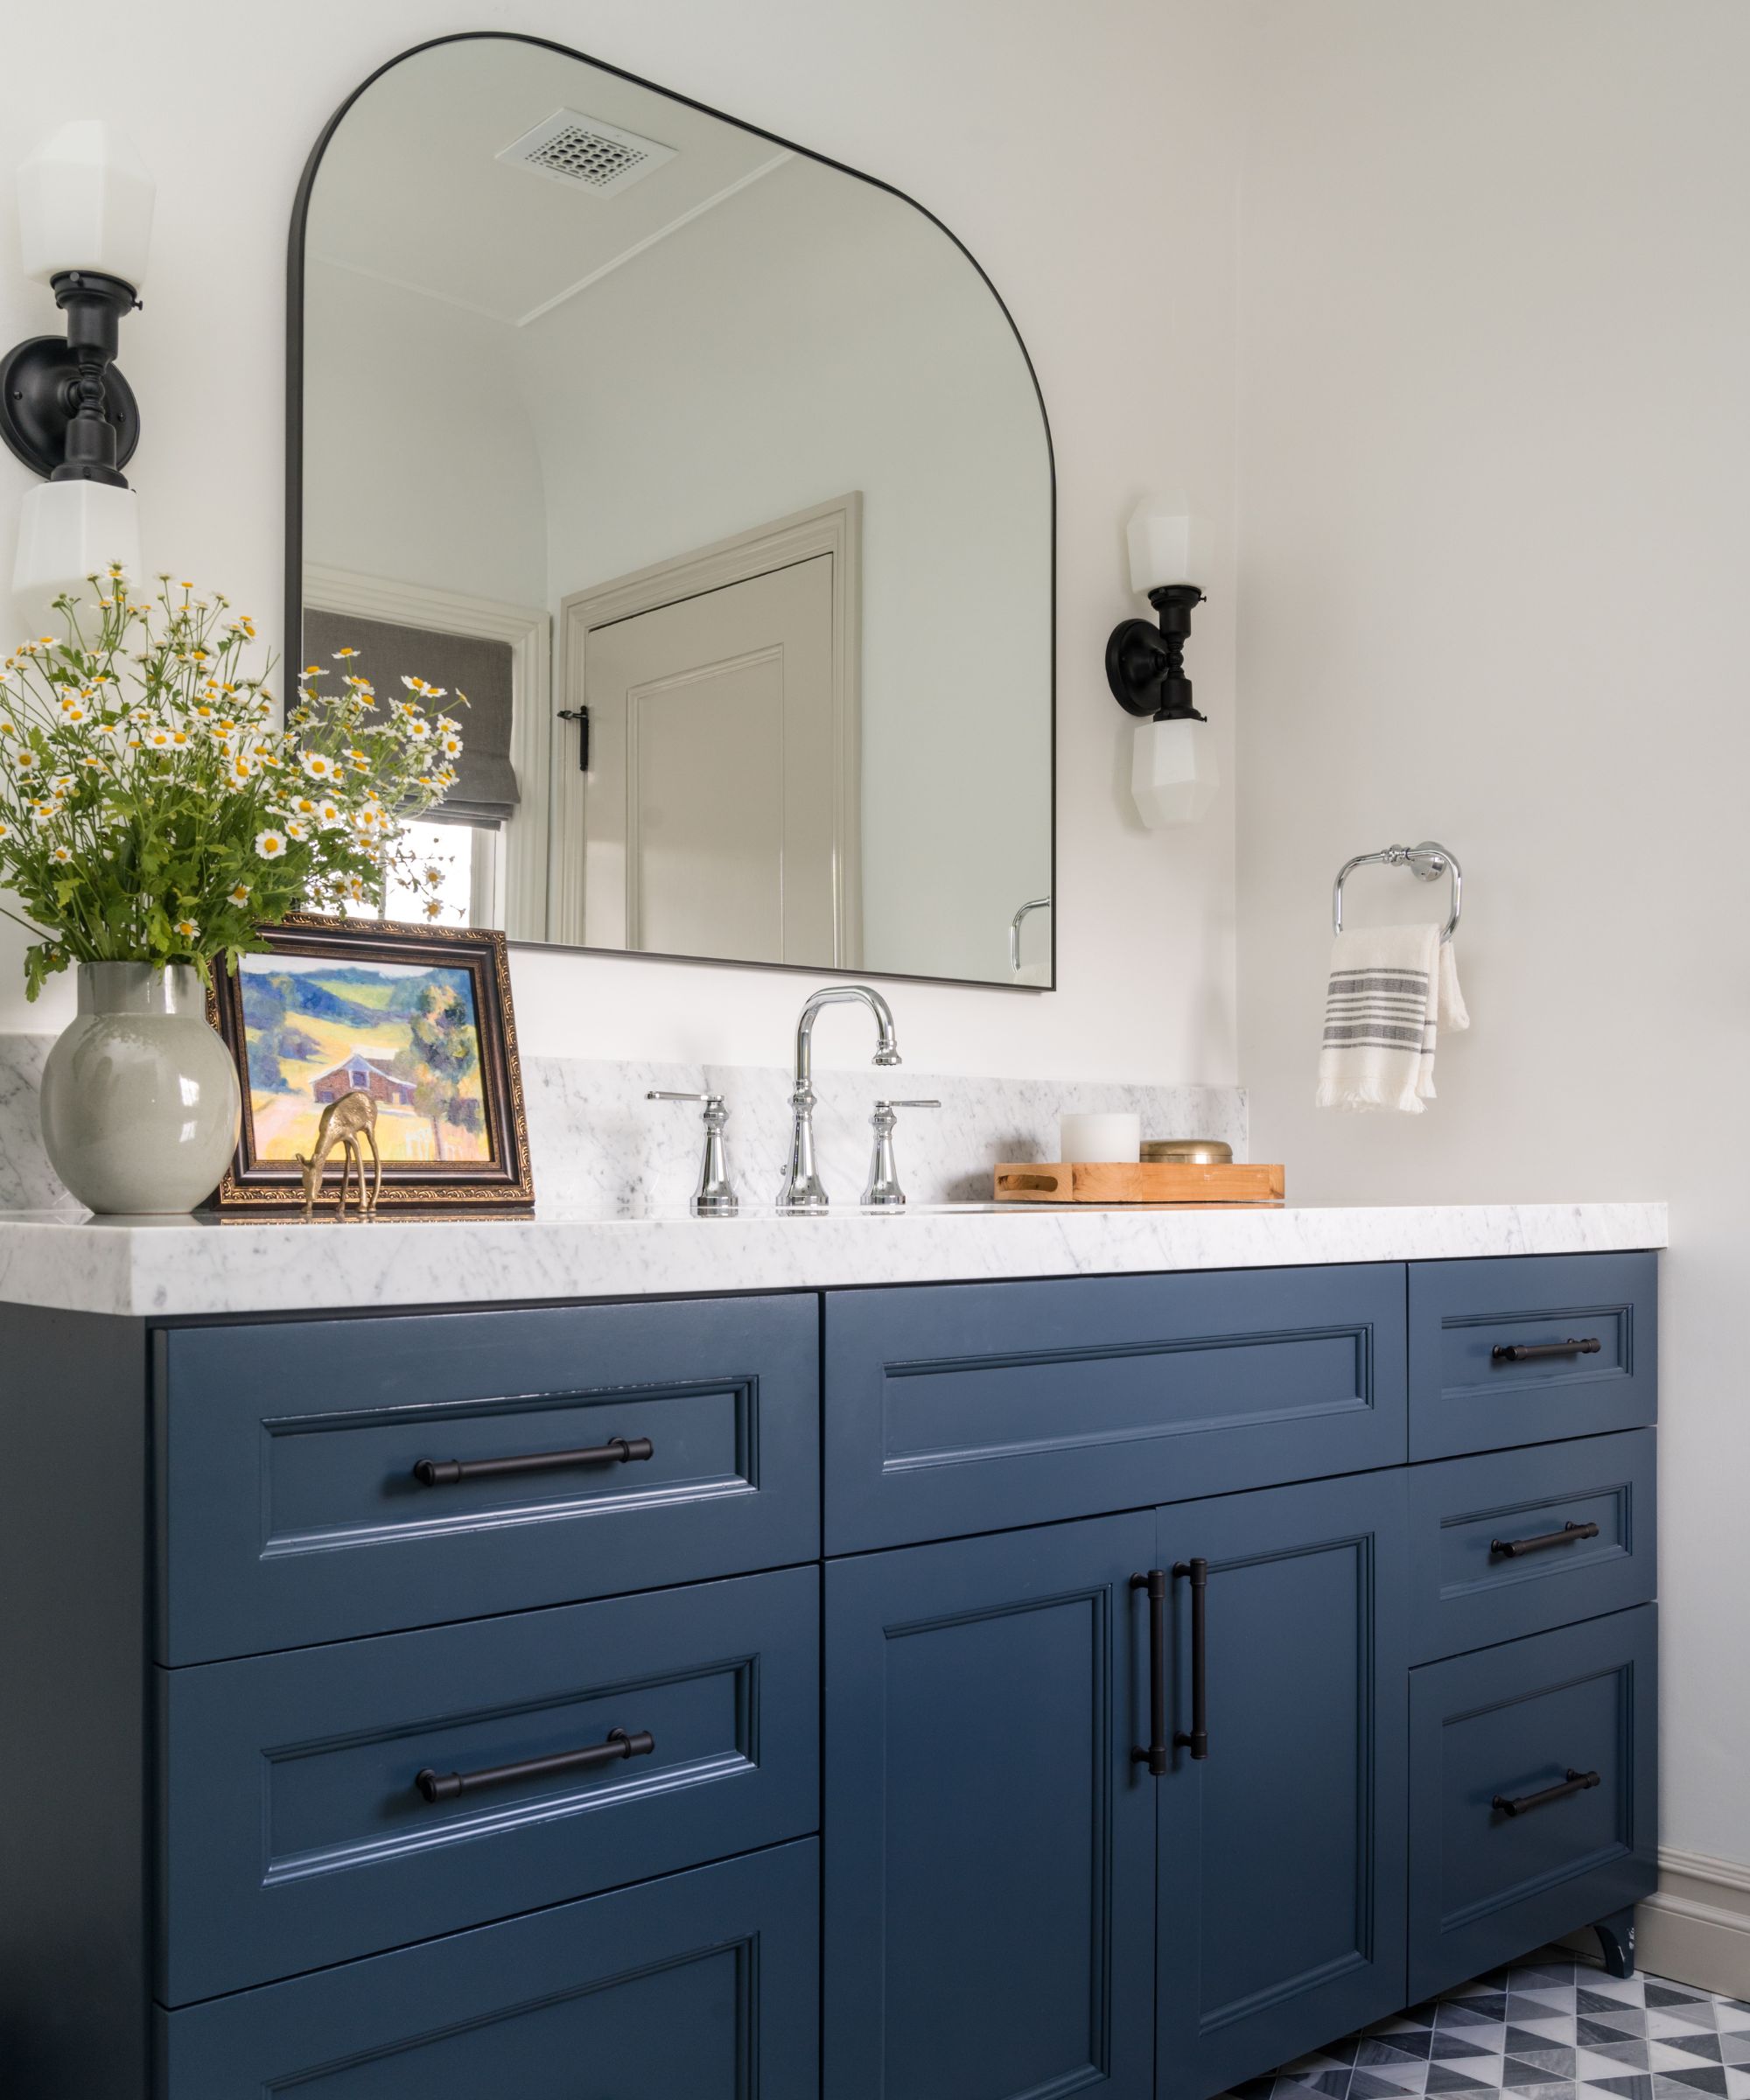 A bathroom with a large vanity mirror and dark blue cabinetry